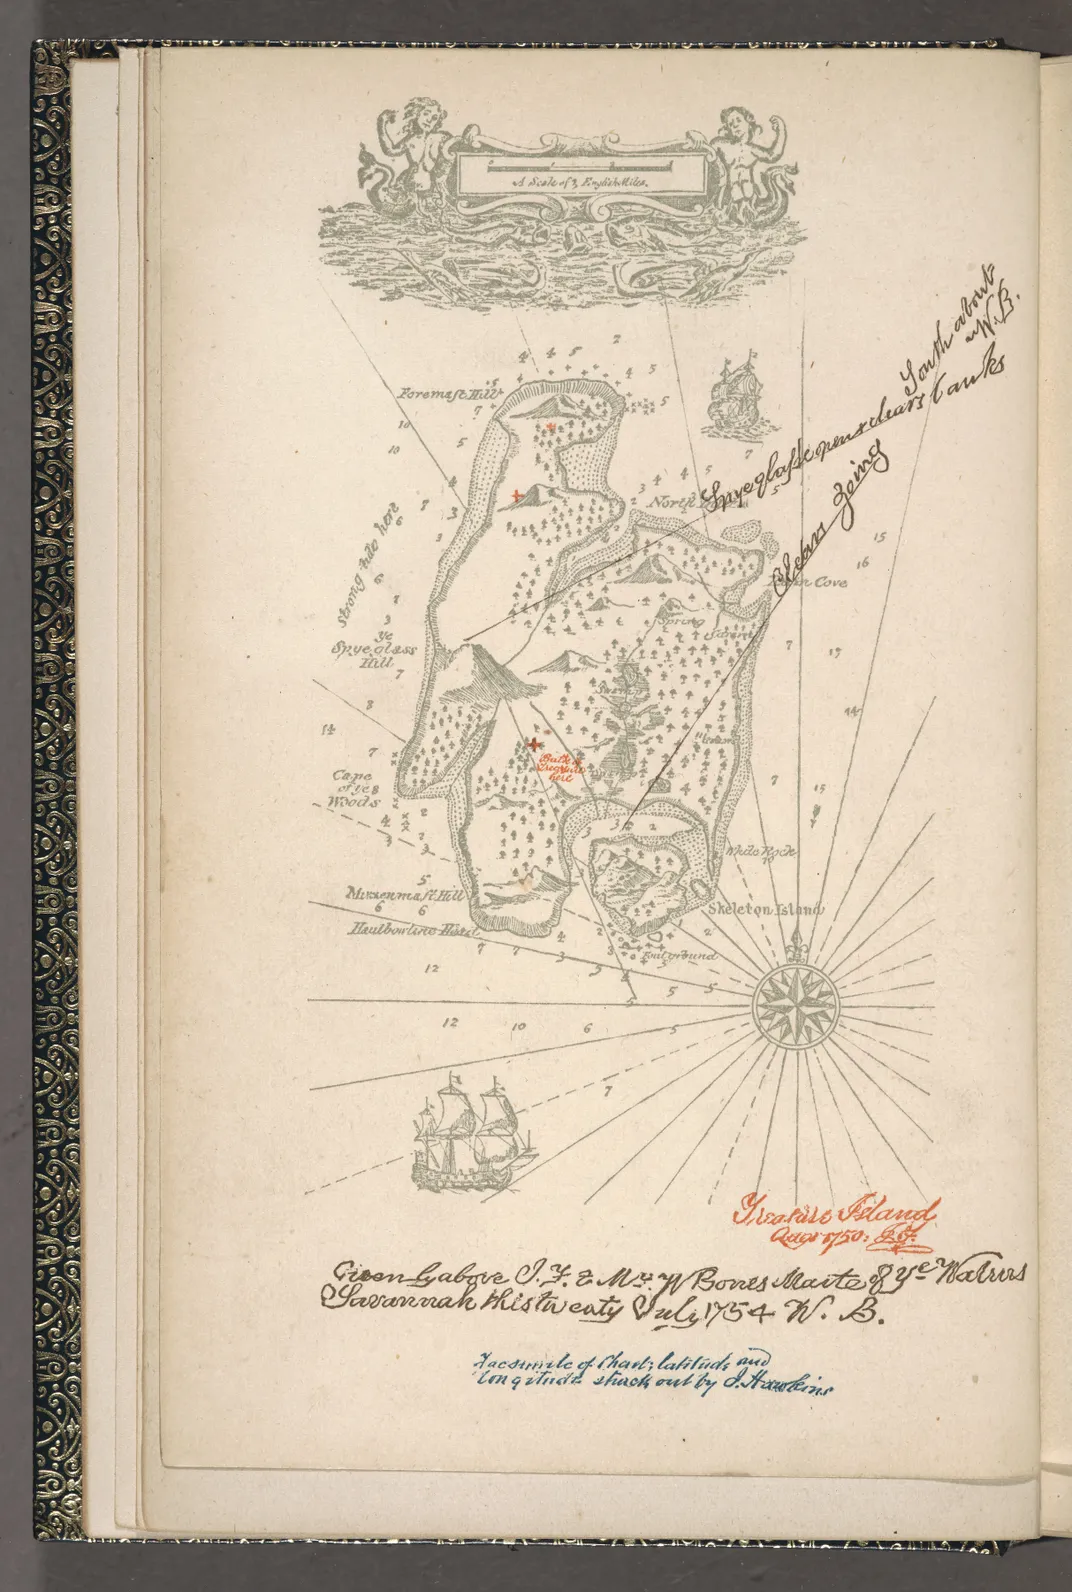 A map of Treasure Island on one page of a book